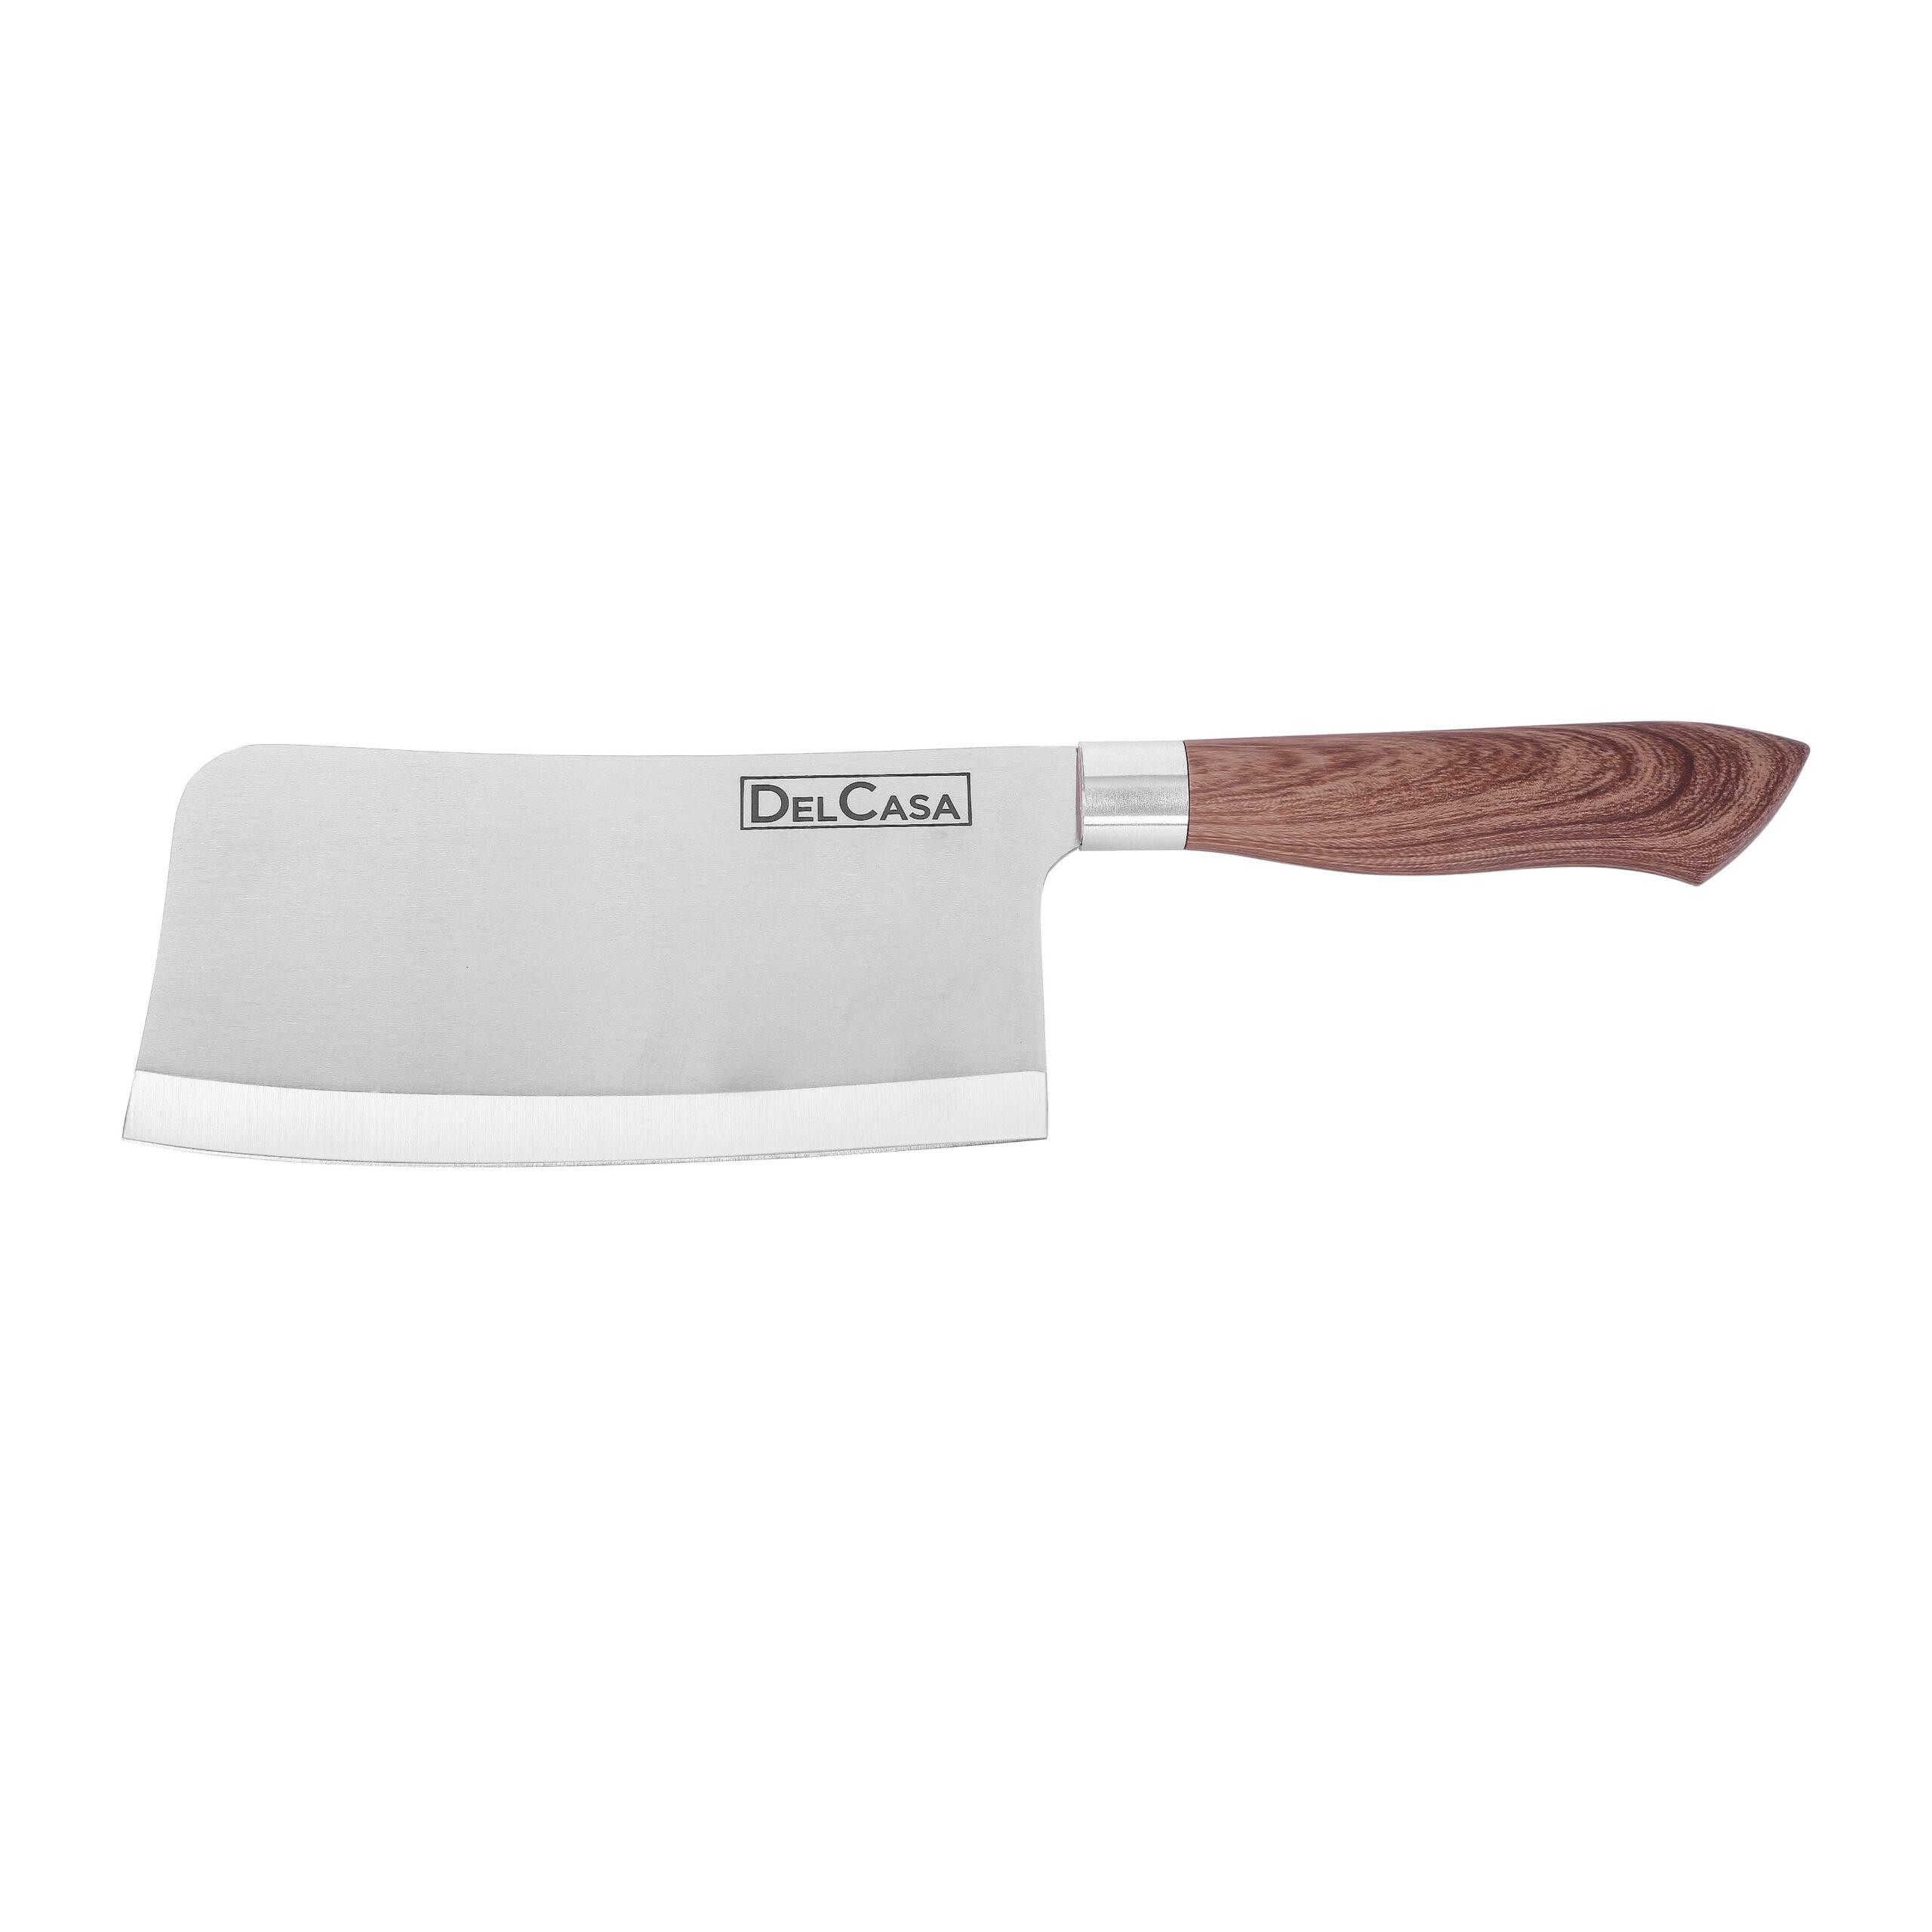 Delcasa Kitchen Cleaver Knife - All Purpose Small Kitchen Knife - Ultra Sharp Stainless Steel Blade